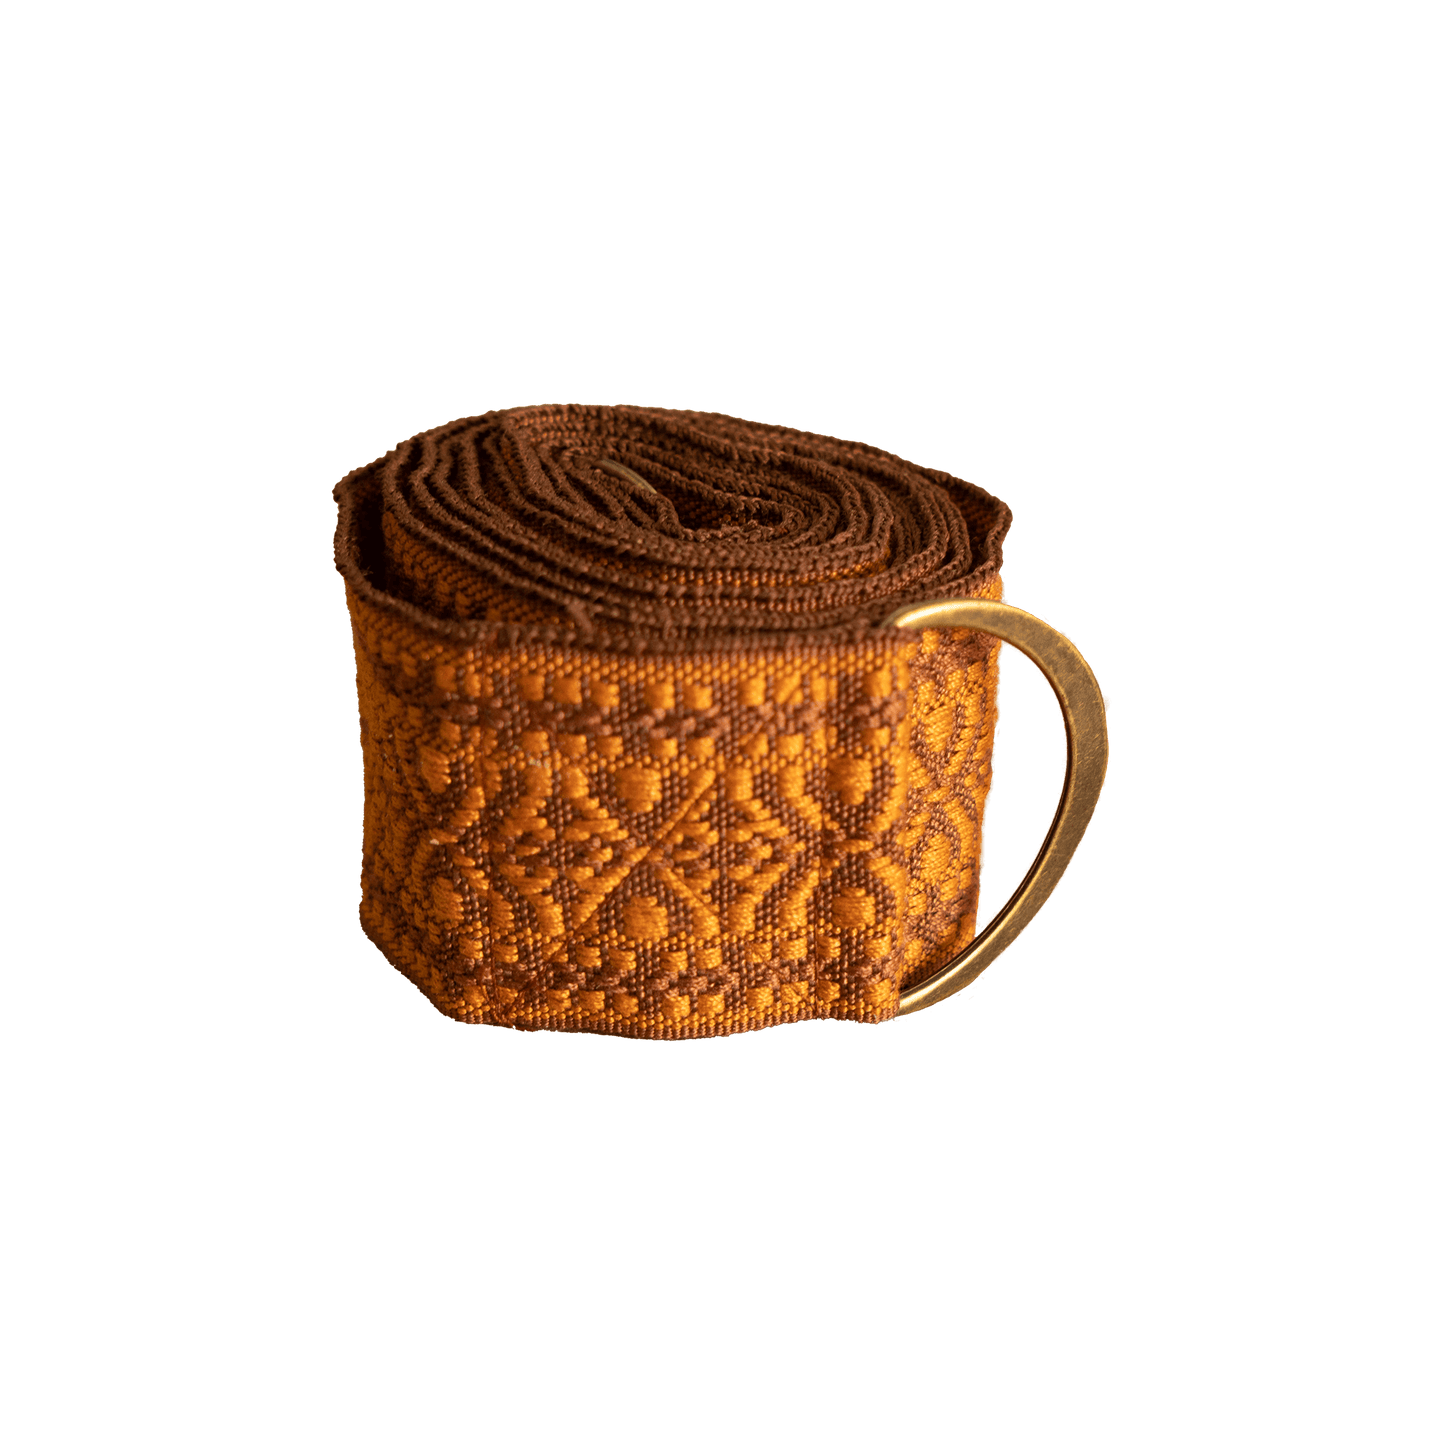 Woven Ornate Carry Strap